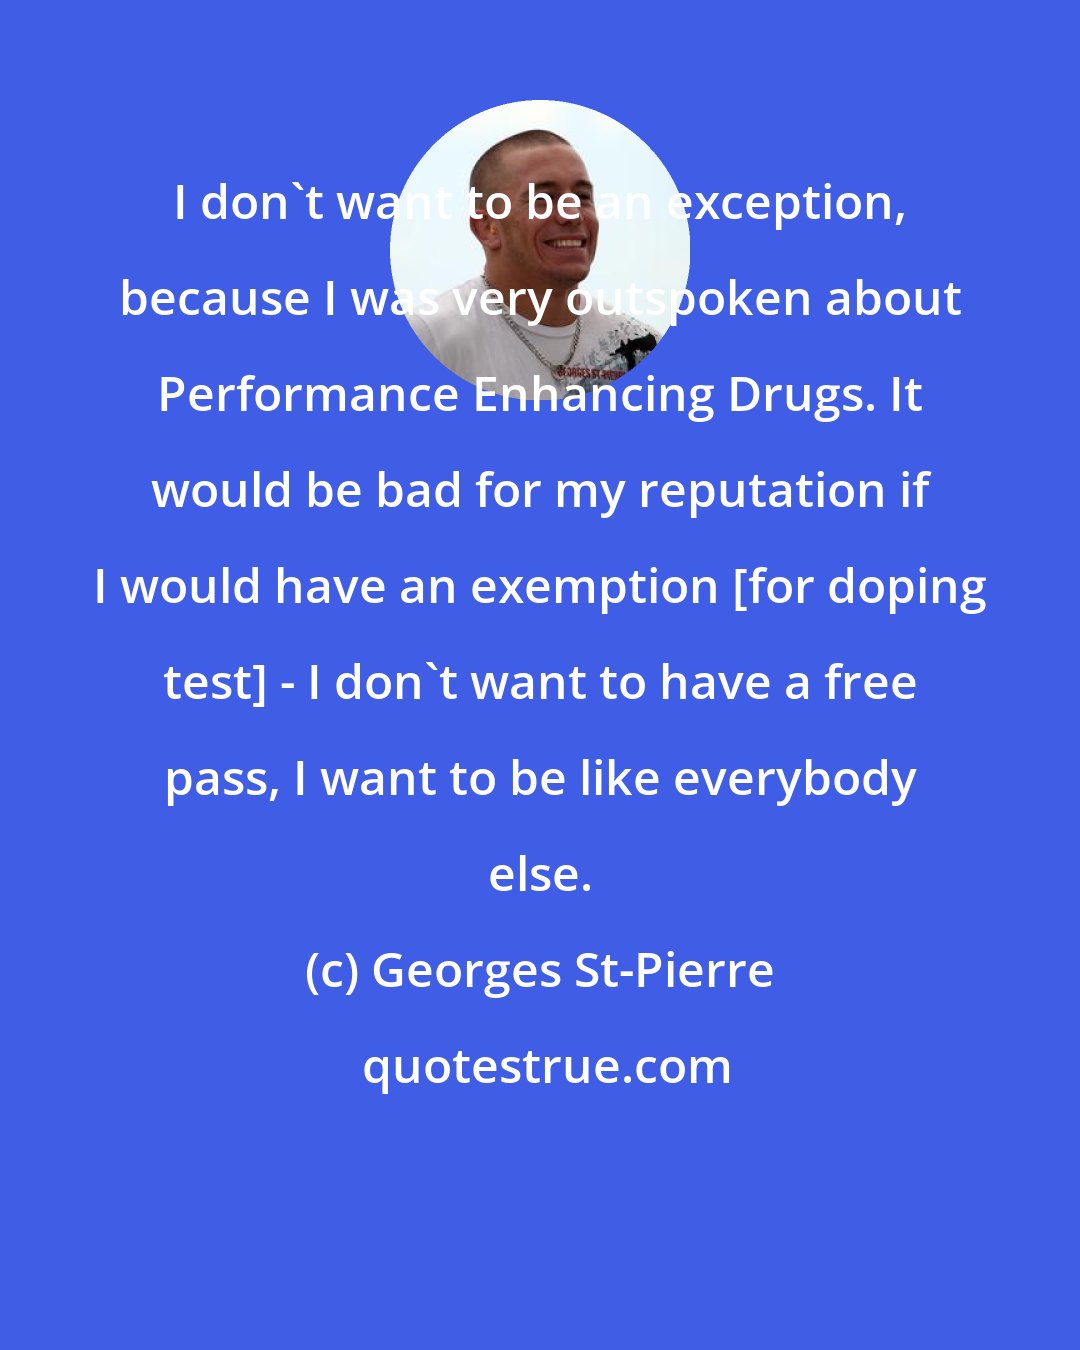 Georges St-Pierre: I don't want to be an exception, because I was very outspoken about Performance Enhancing Drugs. It would be bad for my reputation if I would have an exemption [for doping test] - I don't want to have a free pass, I want to be like everybody else.